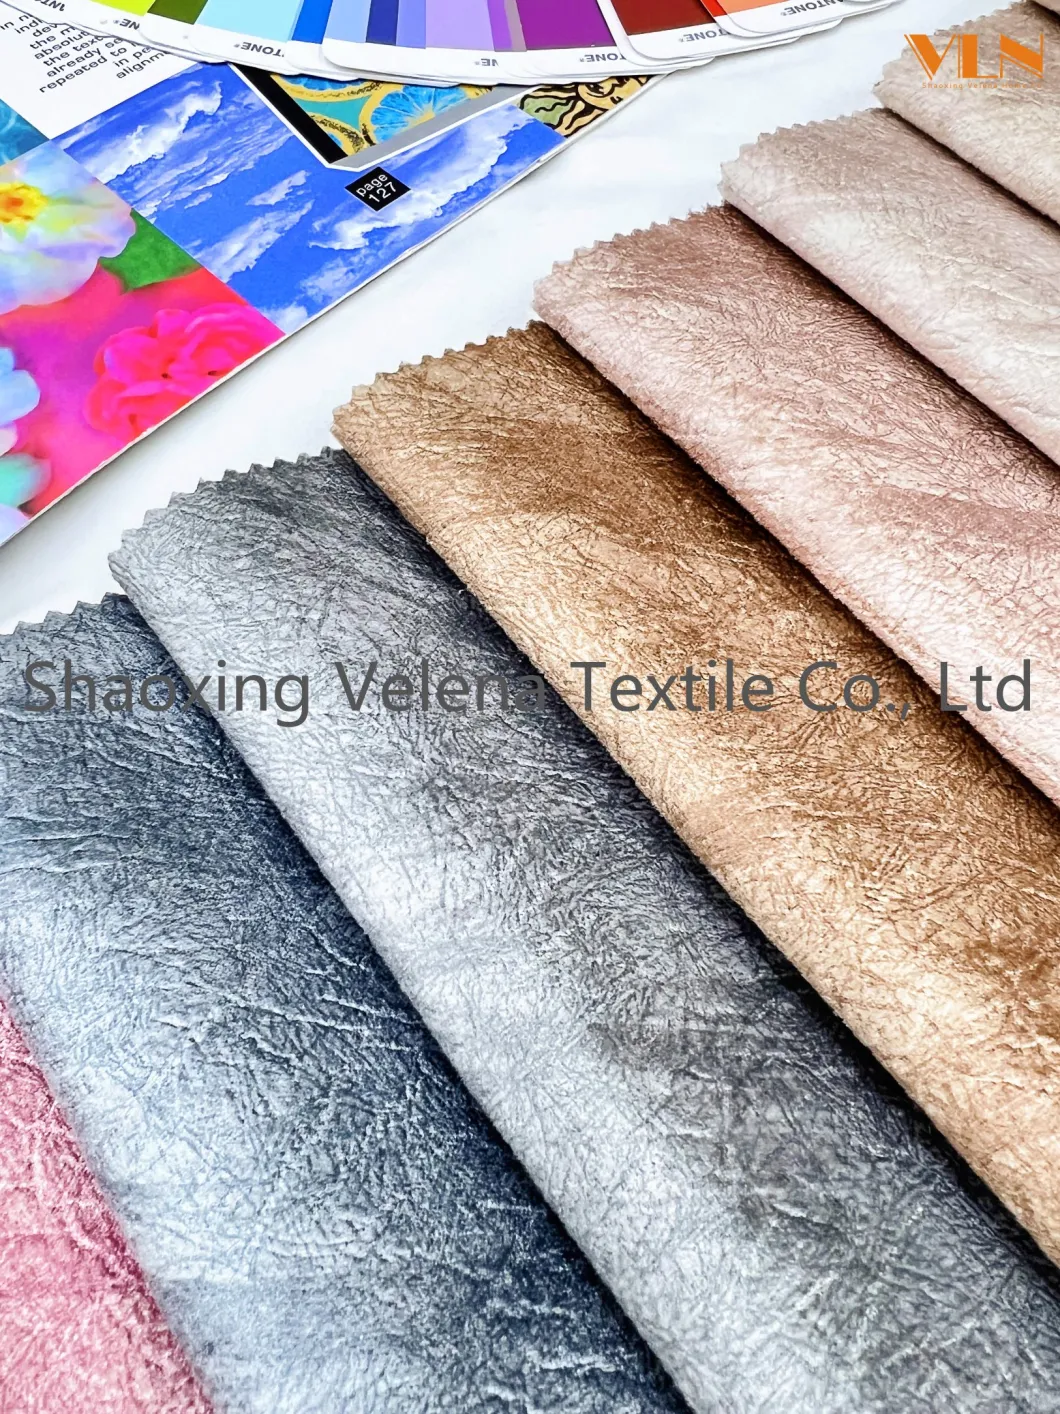 New Arrival Home Textile Holland Velvet Dyeing with Print and Electric Emboss Upholstery Furniture Sofa Curtain Fabric